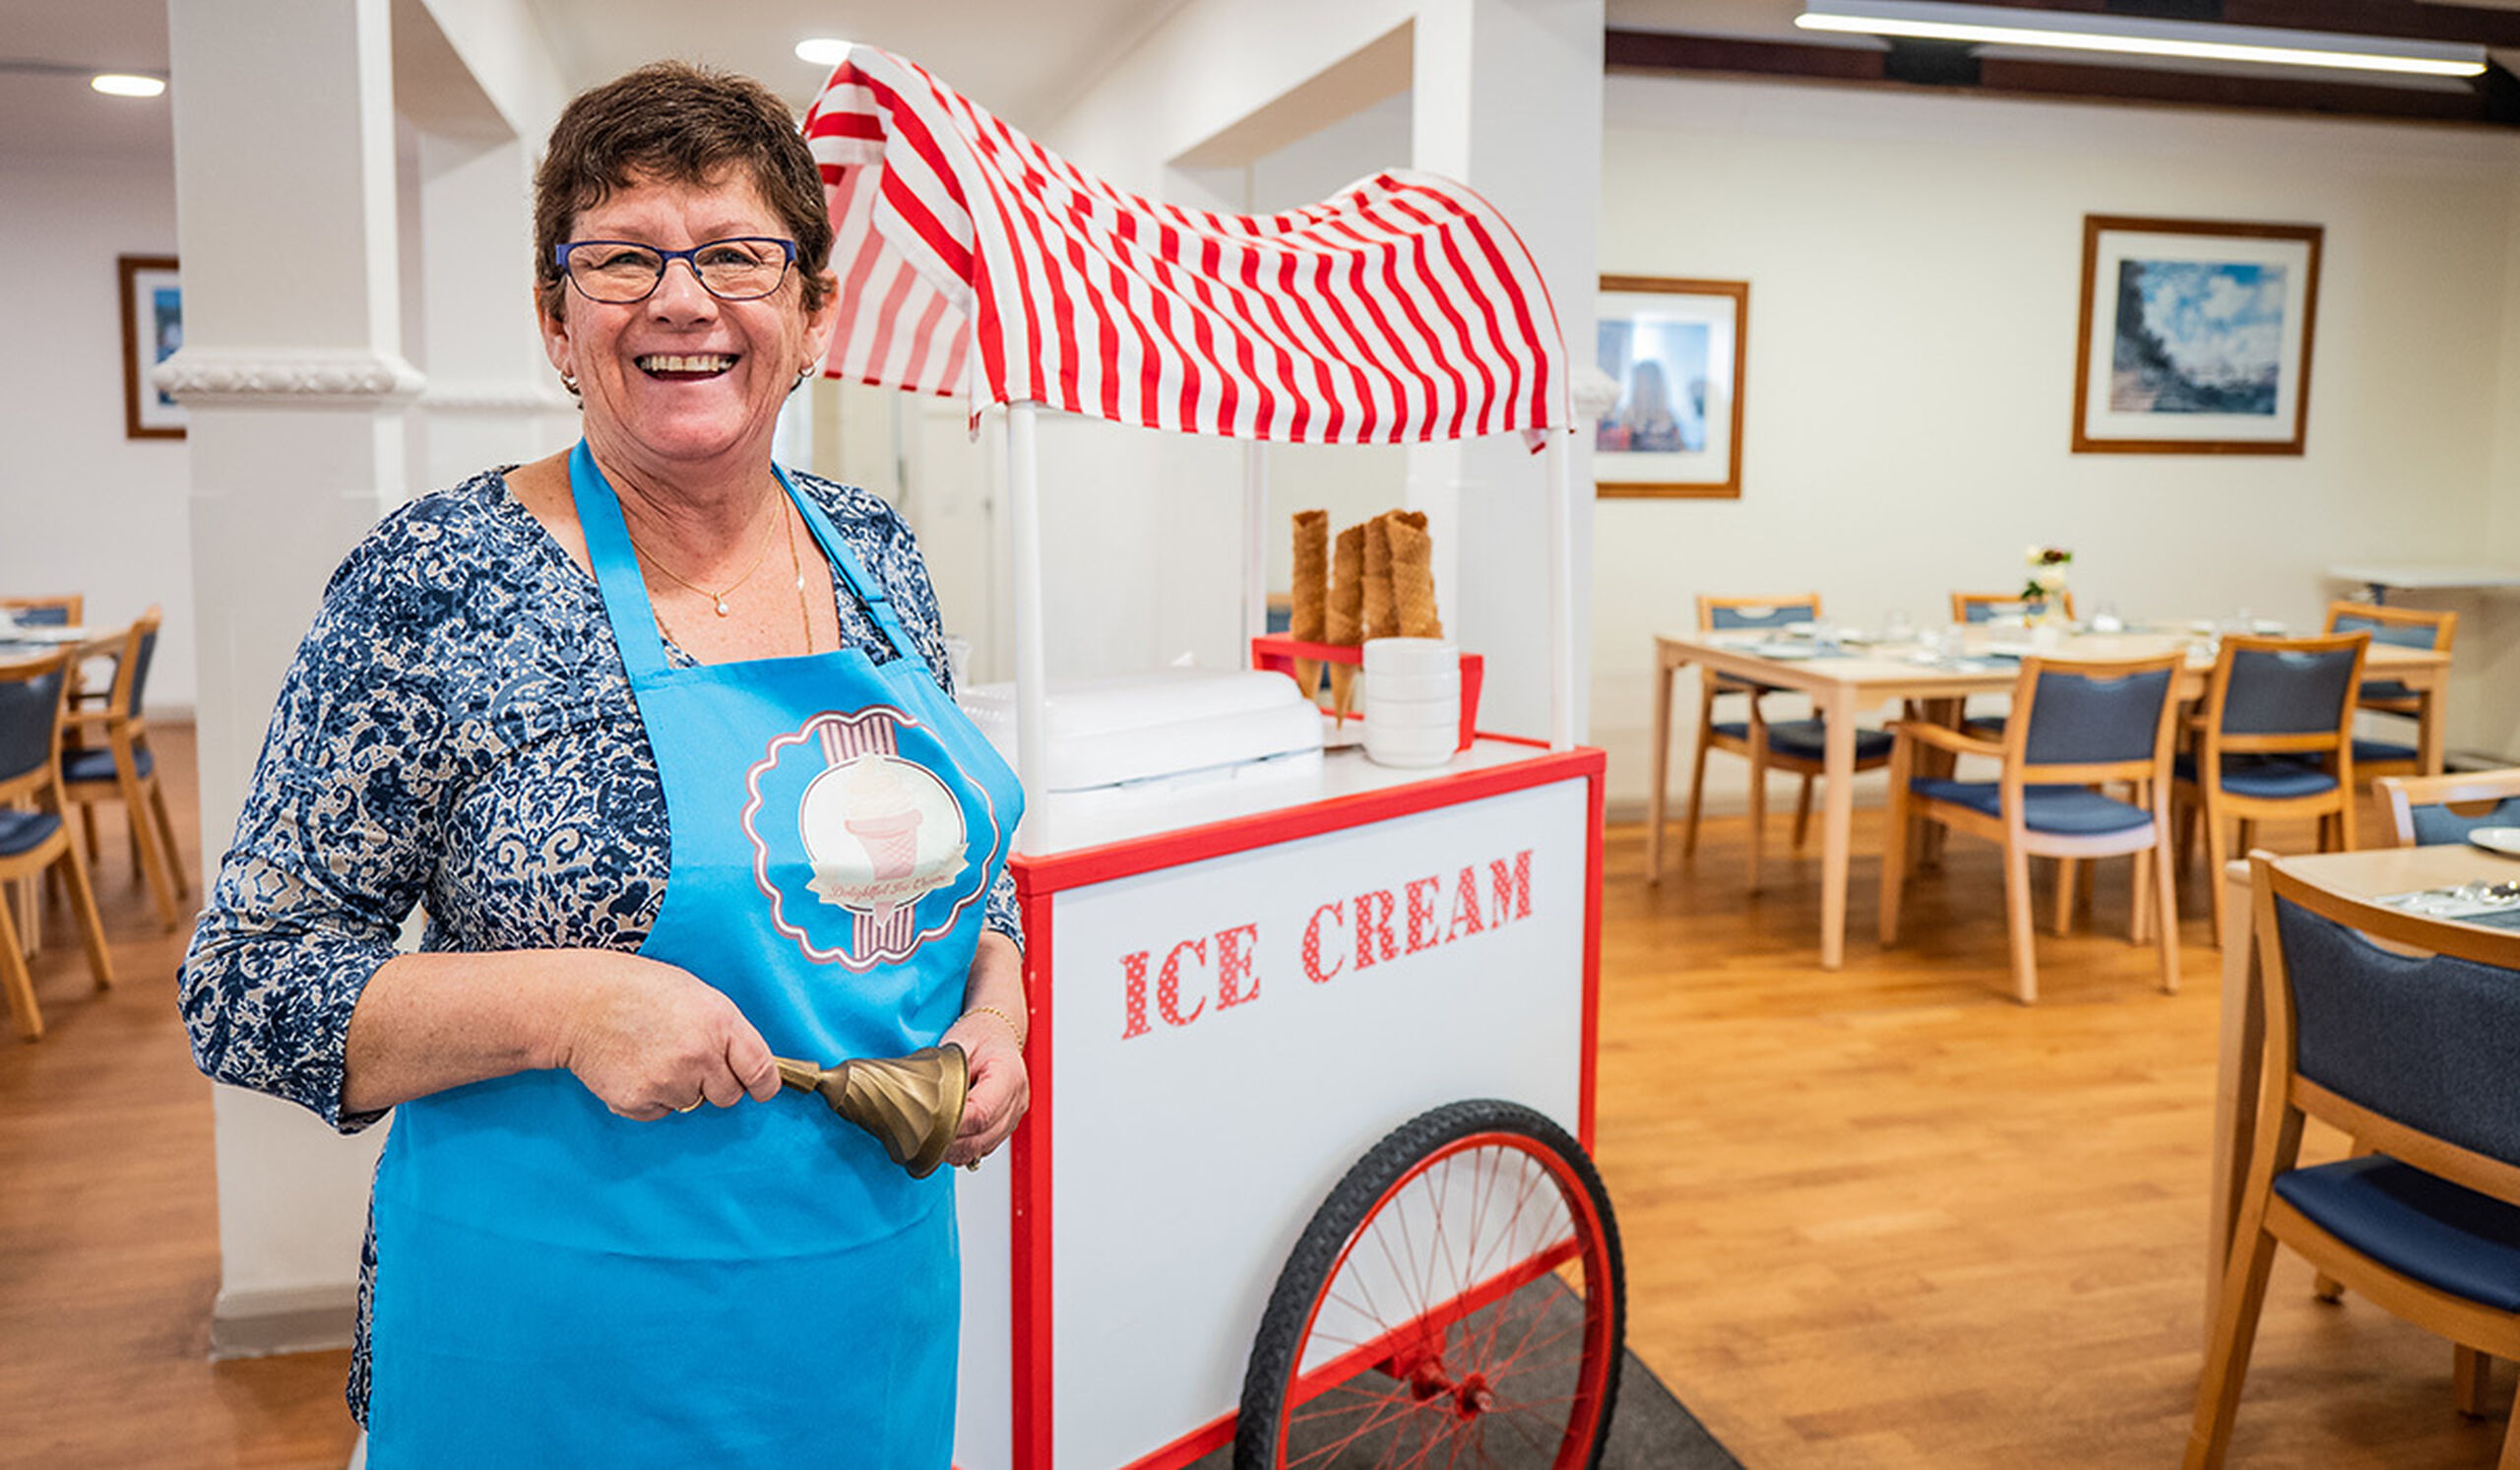 Virtual ice cream round brings joy to Baptistcare Graceford Residential Aged Care residents